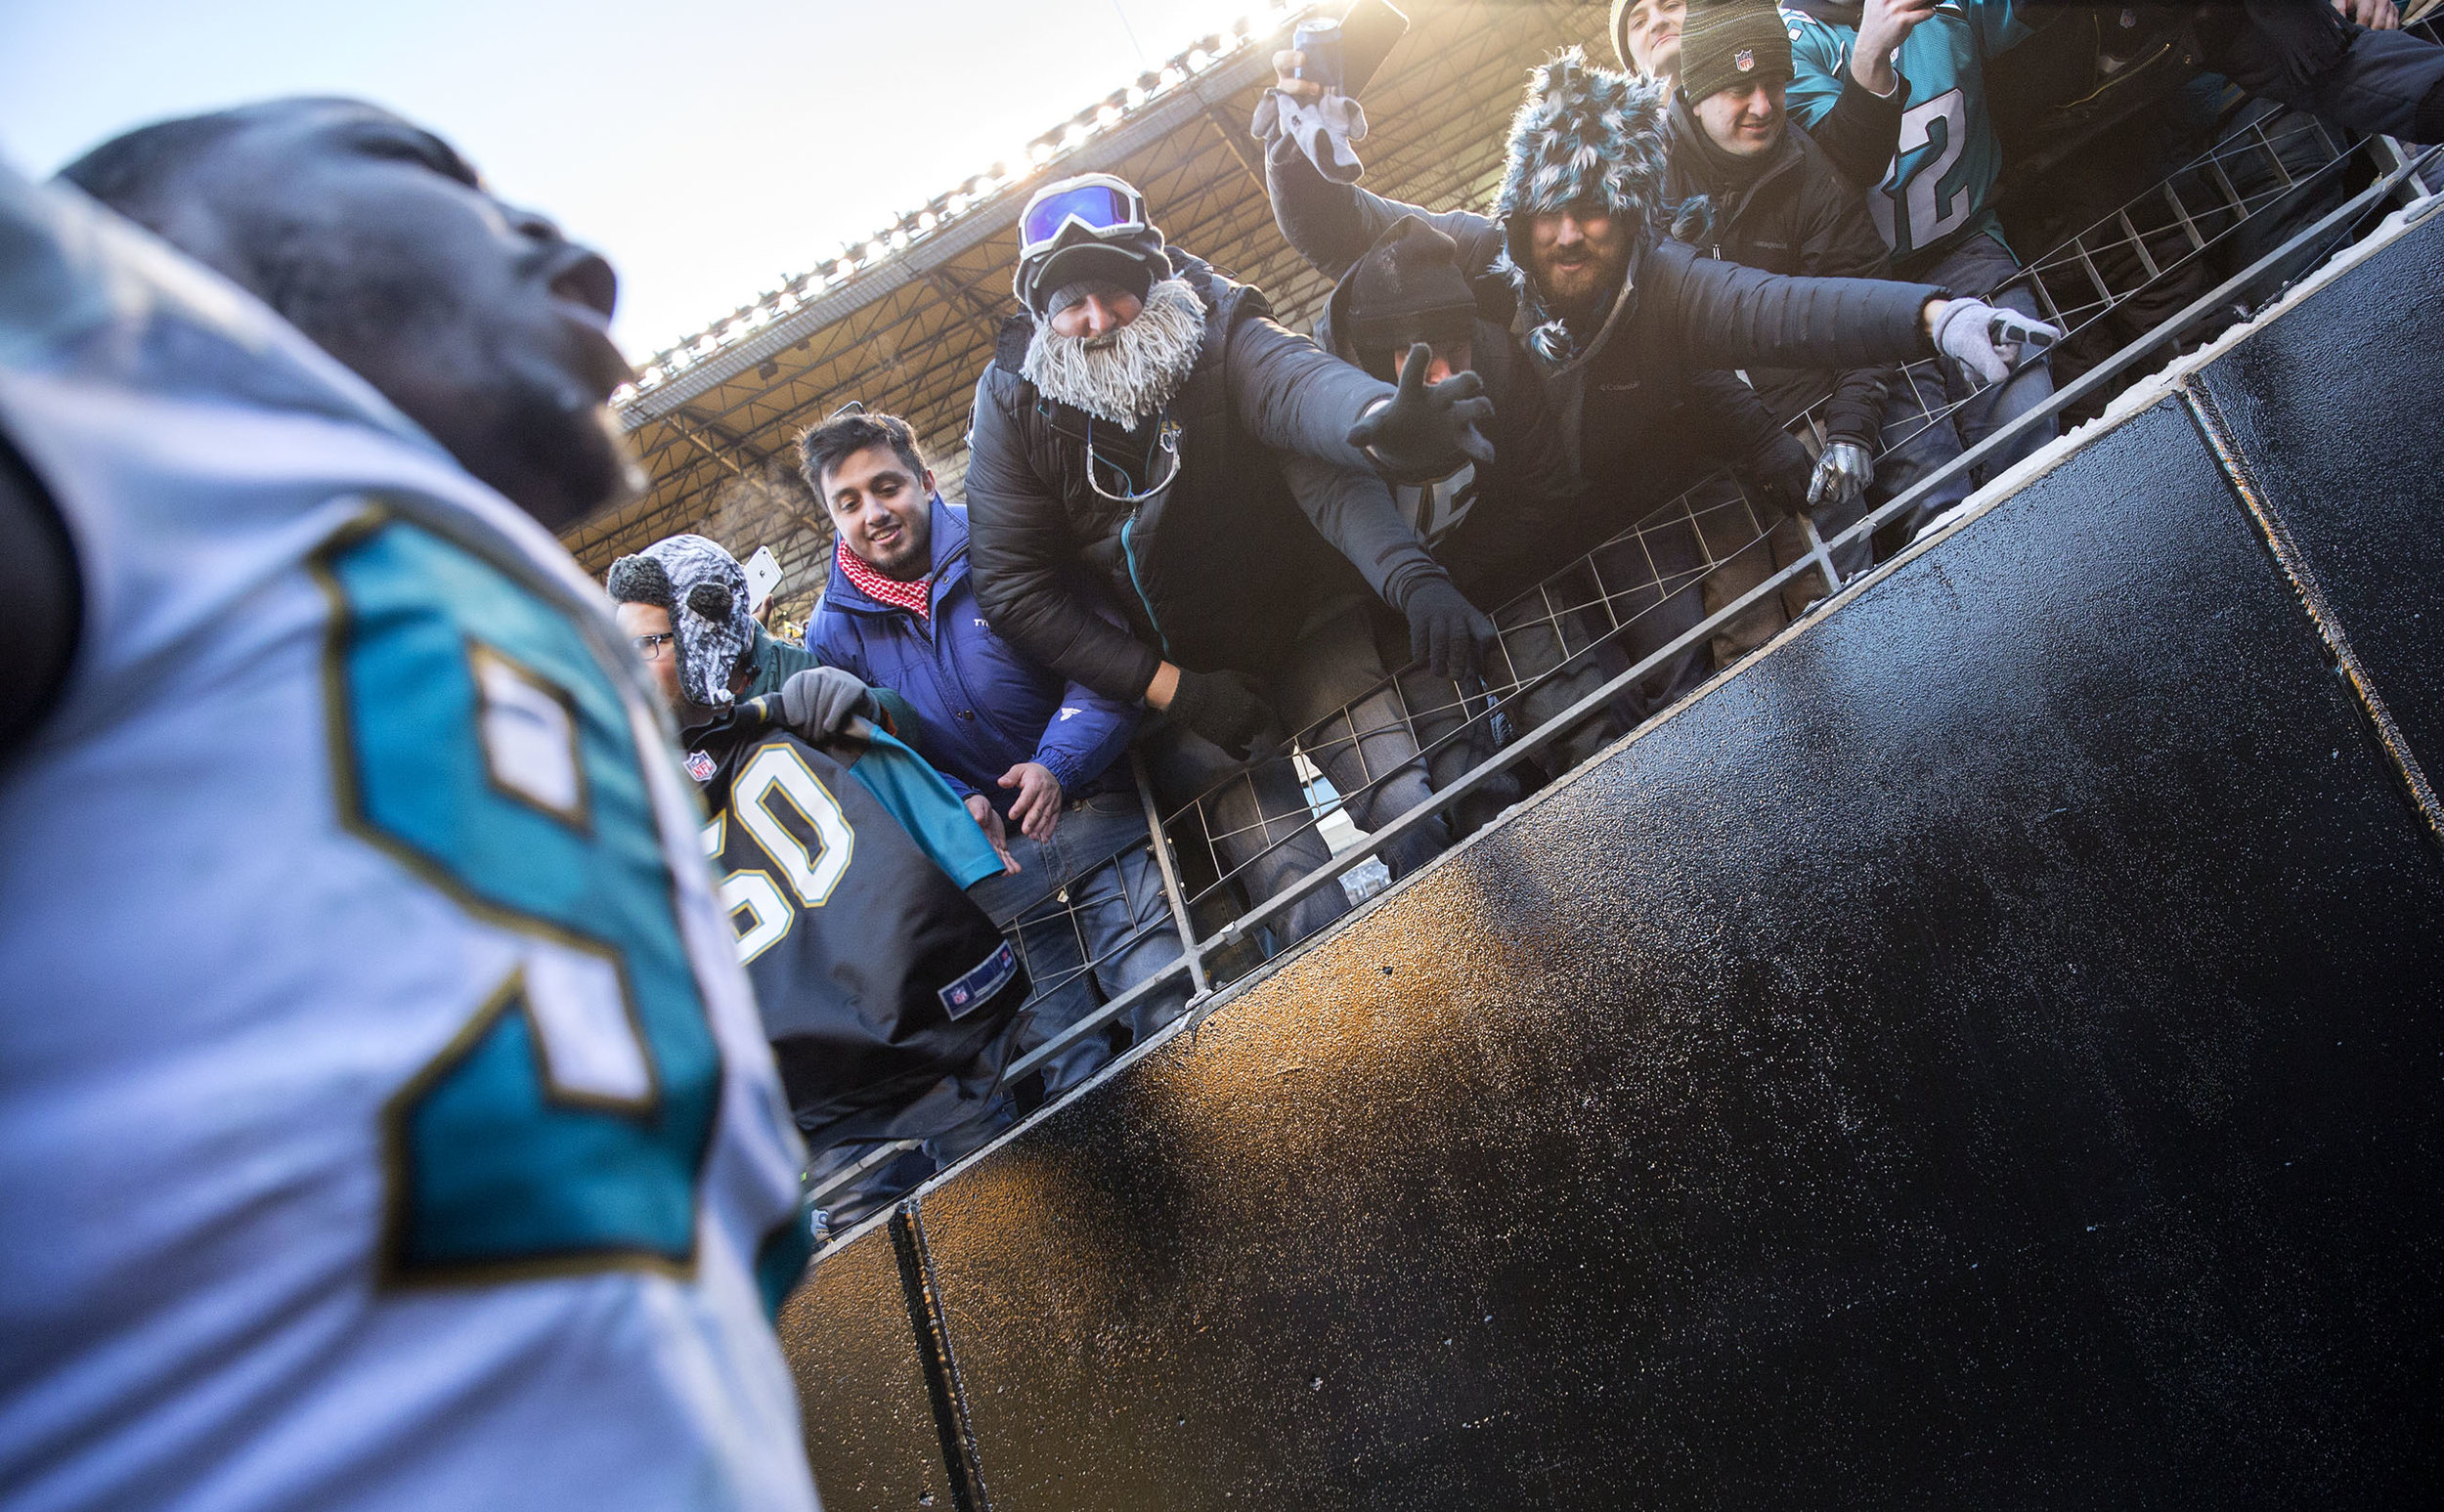  Fans wave at Jaguars Malik Johnson as he screams while entering the tunnel towards the locker room during the divisional playoff game on Sunday, Jan. 14, 2018 at Heinz Field. The Steelers lost to the Jaguars 45-42.&nbsp; 